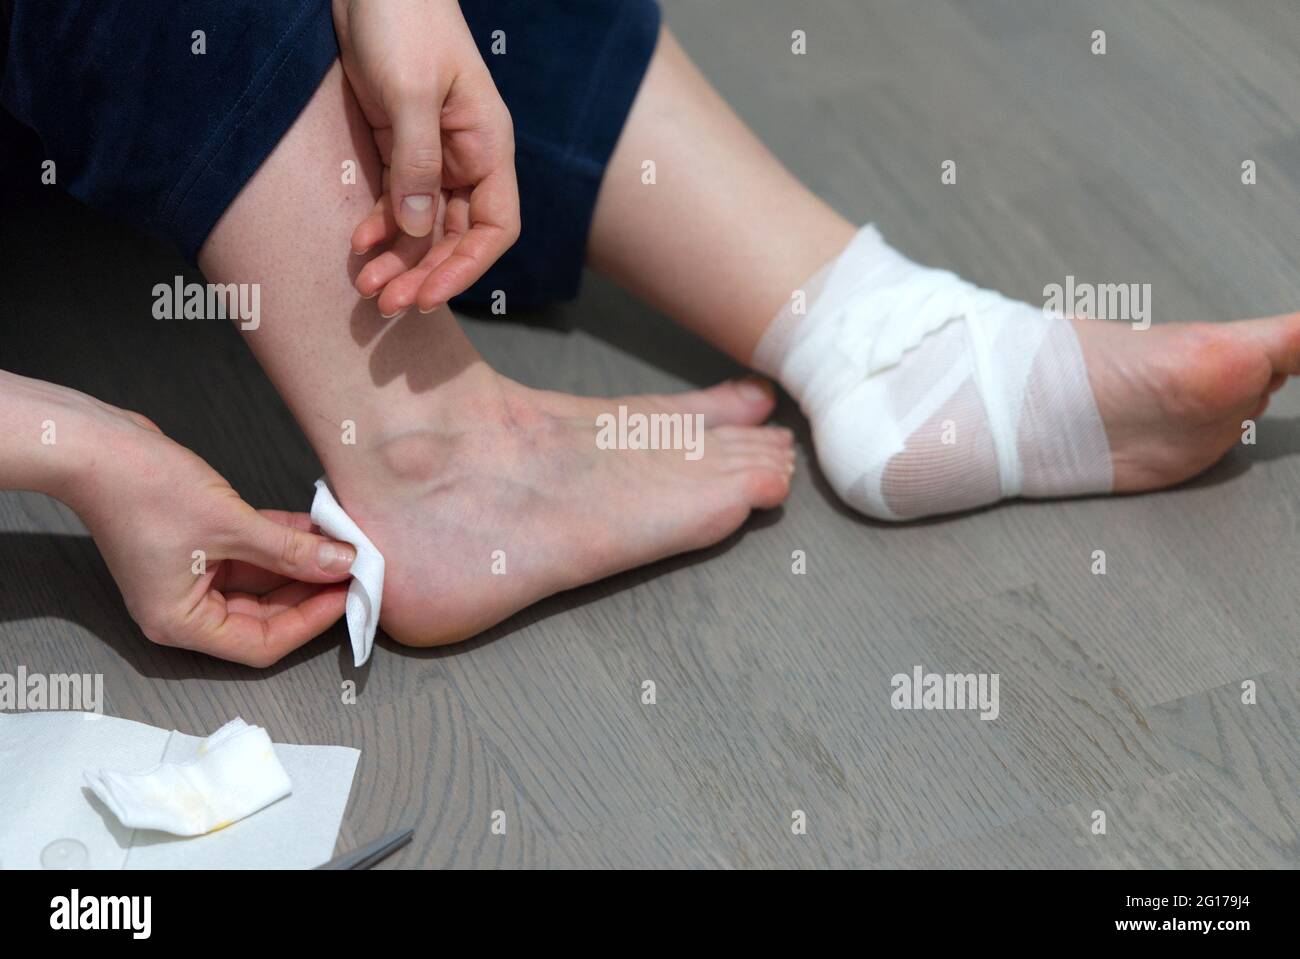 callus on leg. Girl uses ointment, Band-Aid and bandage to treat calluse Stock Photo